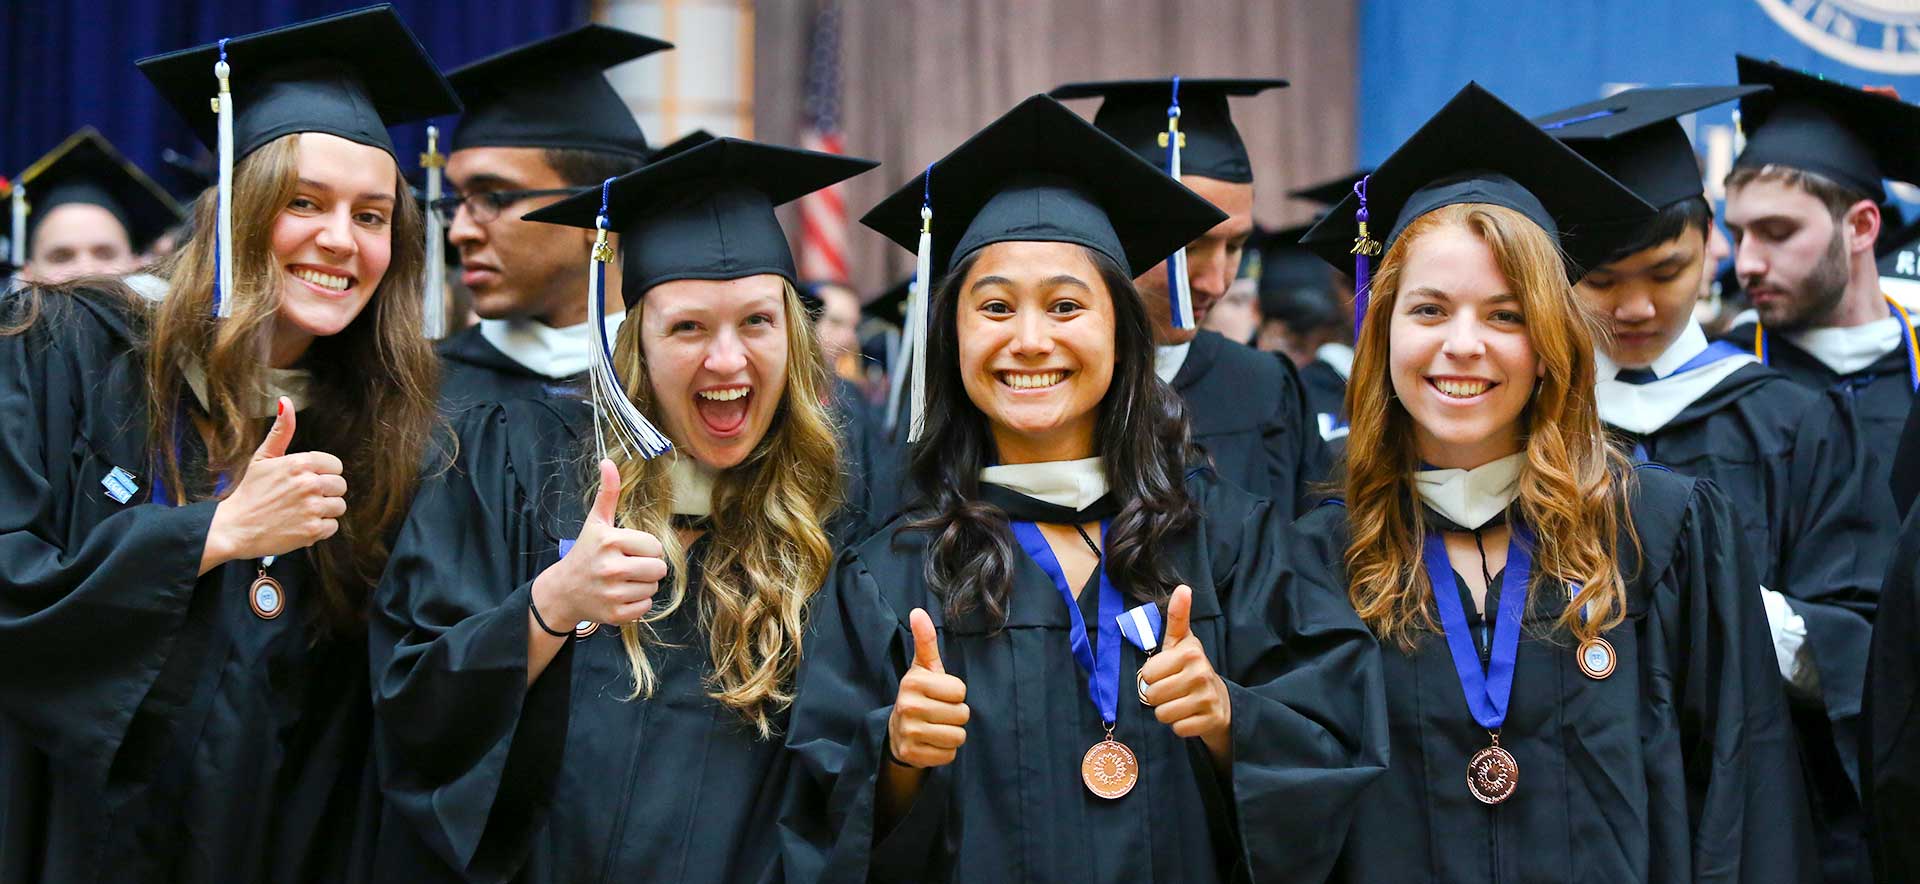 Brandeis graduates in caps and gowns giving the thumbs up